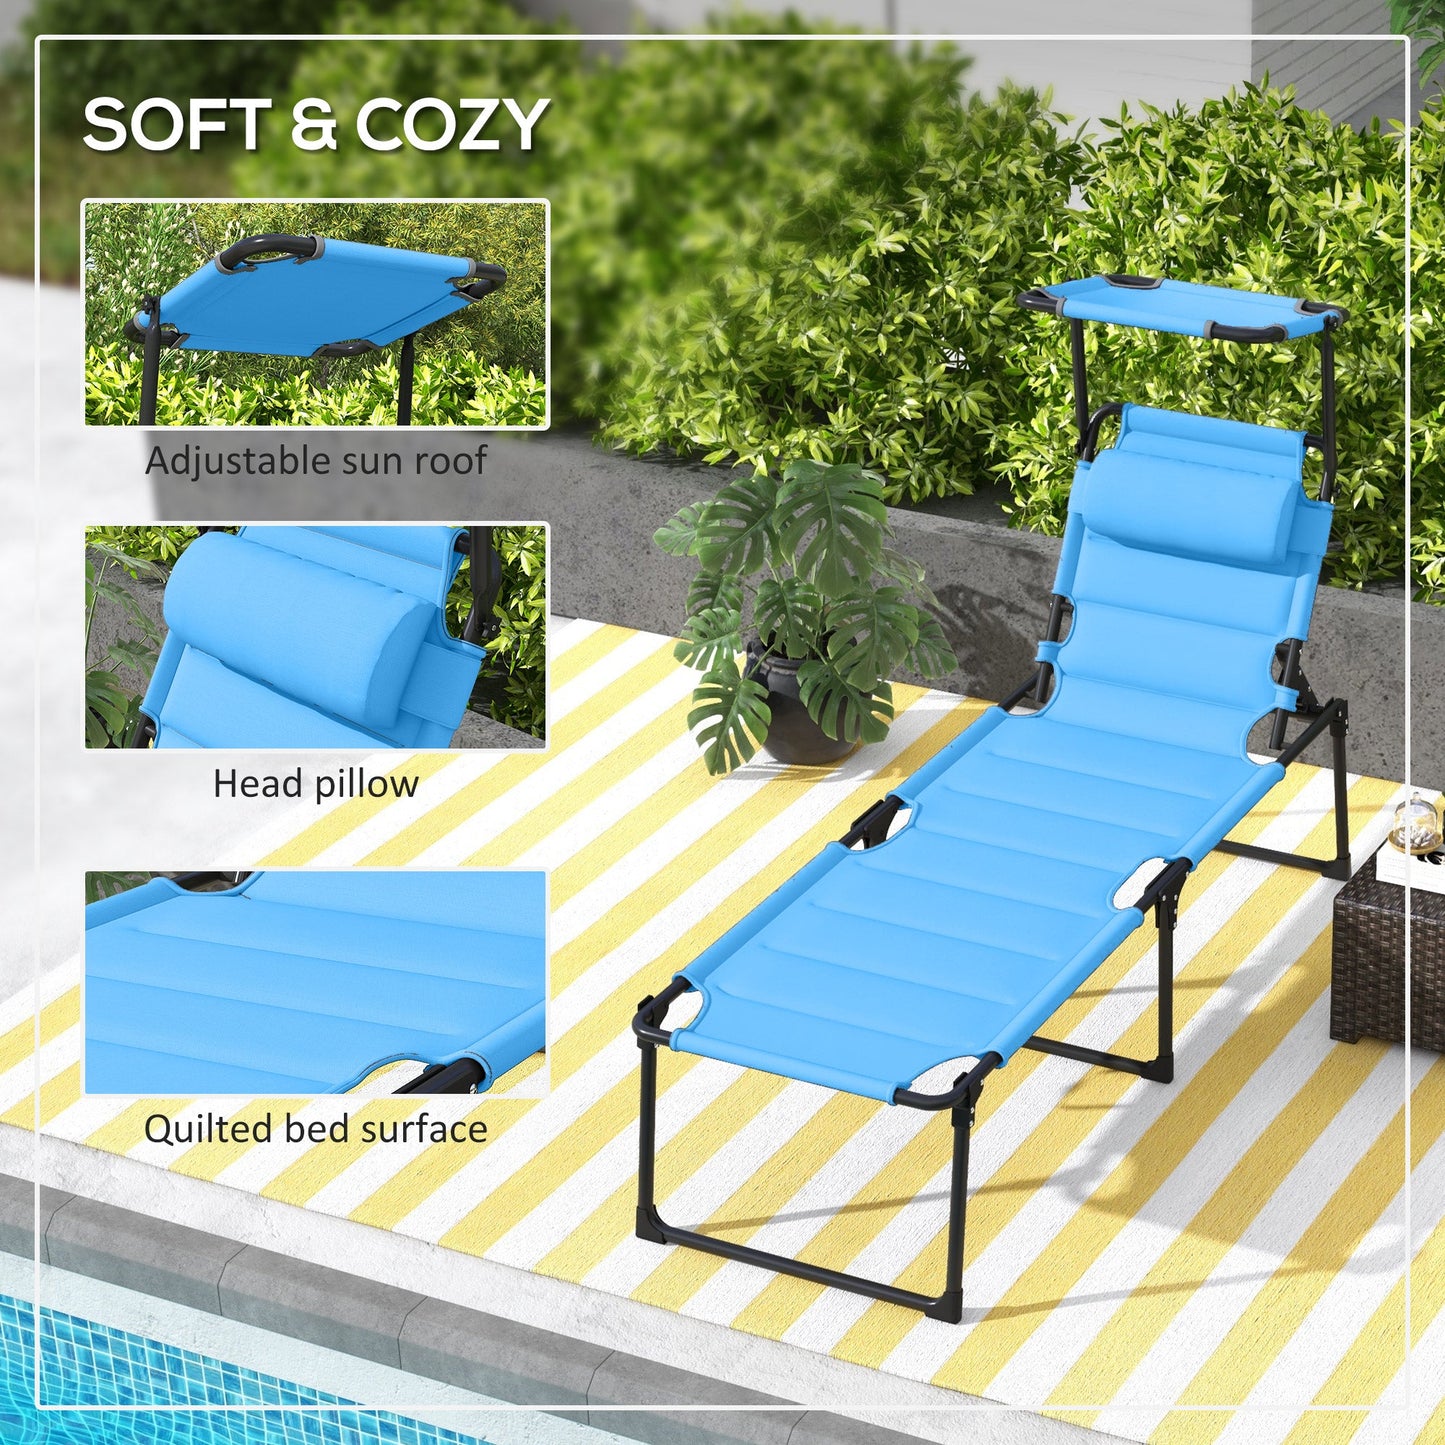 -Outsunny Adjustable Folding Chaise Lounge with 4-position Backrest, Sun Roof, Head Pillow for Patio, Balcony, Outdoor, Light Blue - Outdoor Style Company